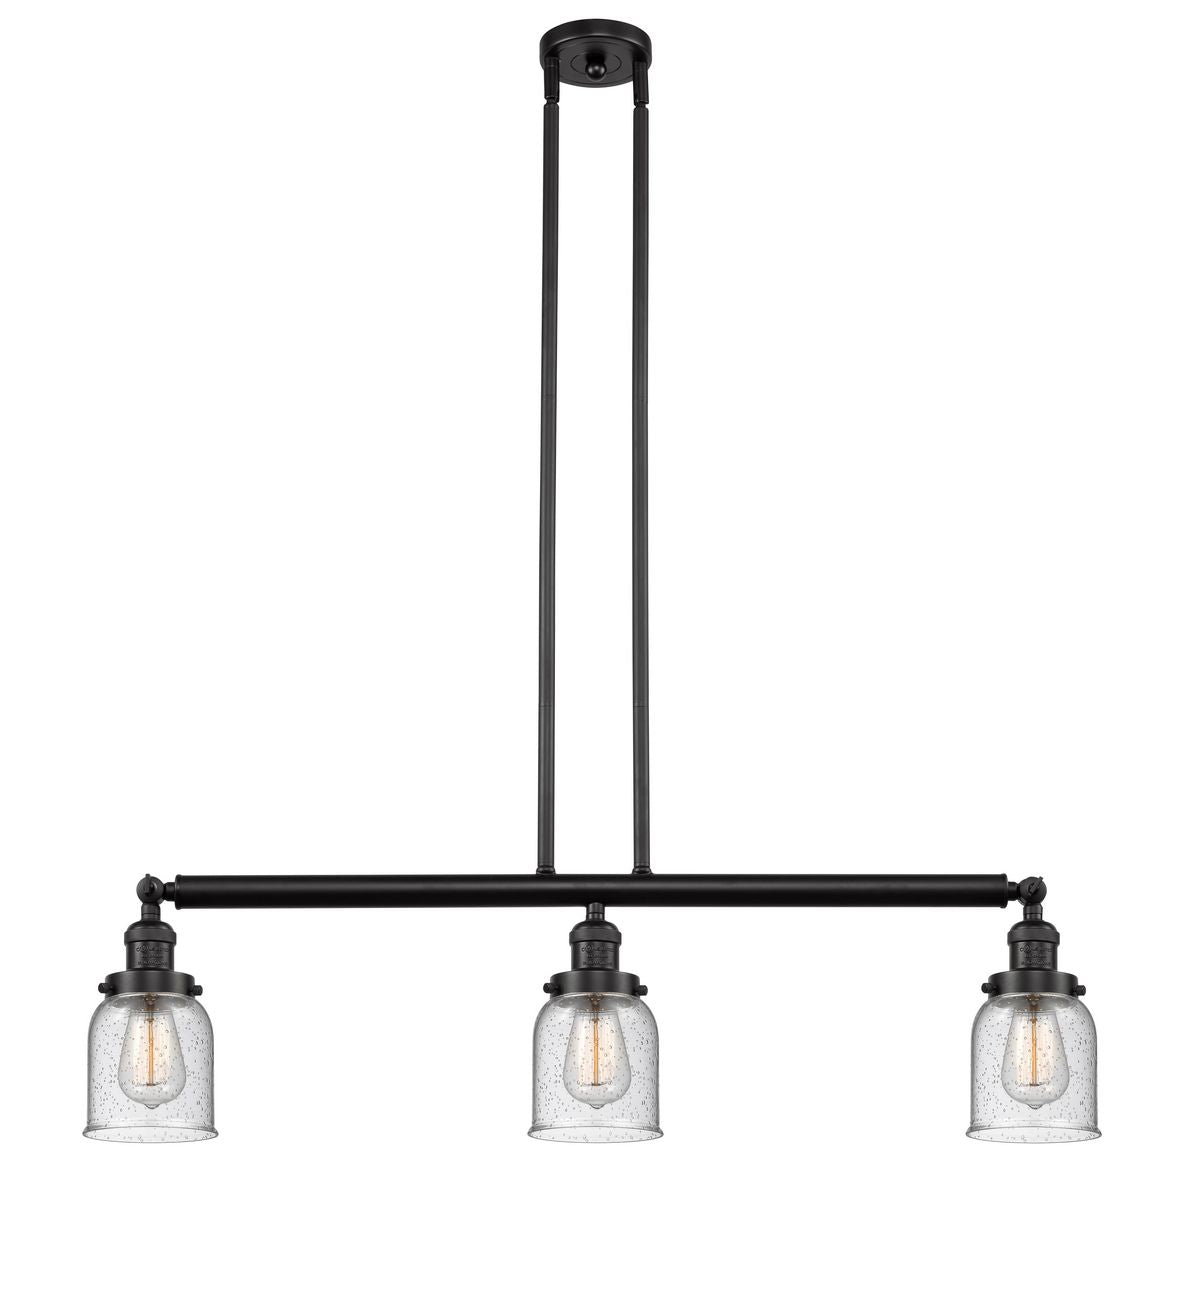 213-OB-G54 3-Light 37.5" Oil Rubbed Bronze Island Light - Seedy Small Bell Glass - LED Bulb - Dimmensions: 37.5 x 7.5 x 10<br>Minimum Height : 20<br>Maximum Height : 44 - Sloped Ceiling Compatible: Yes